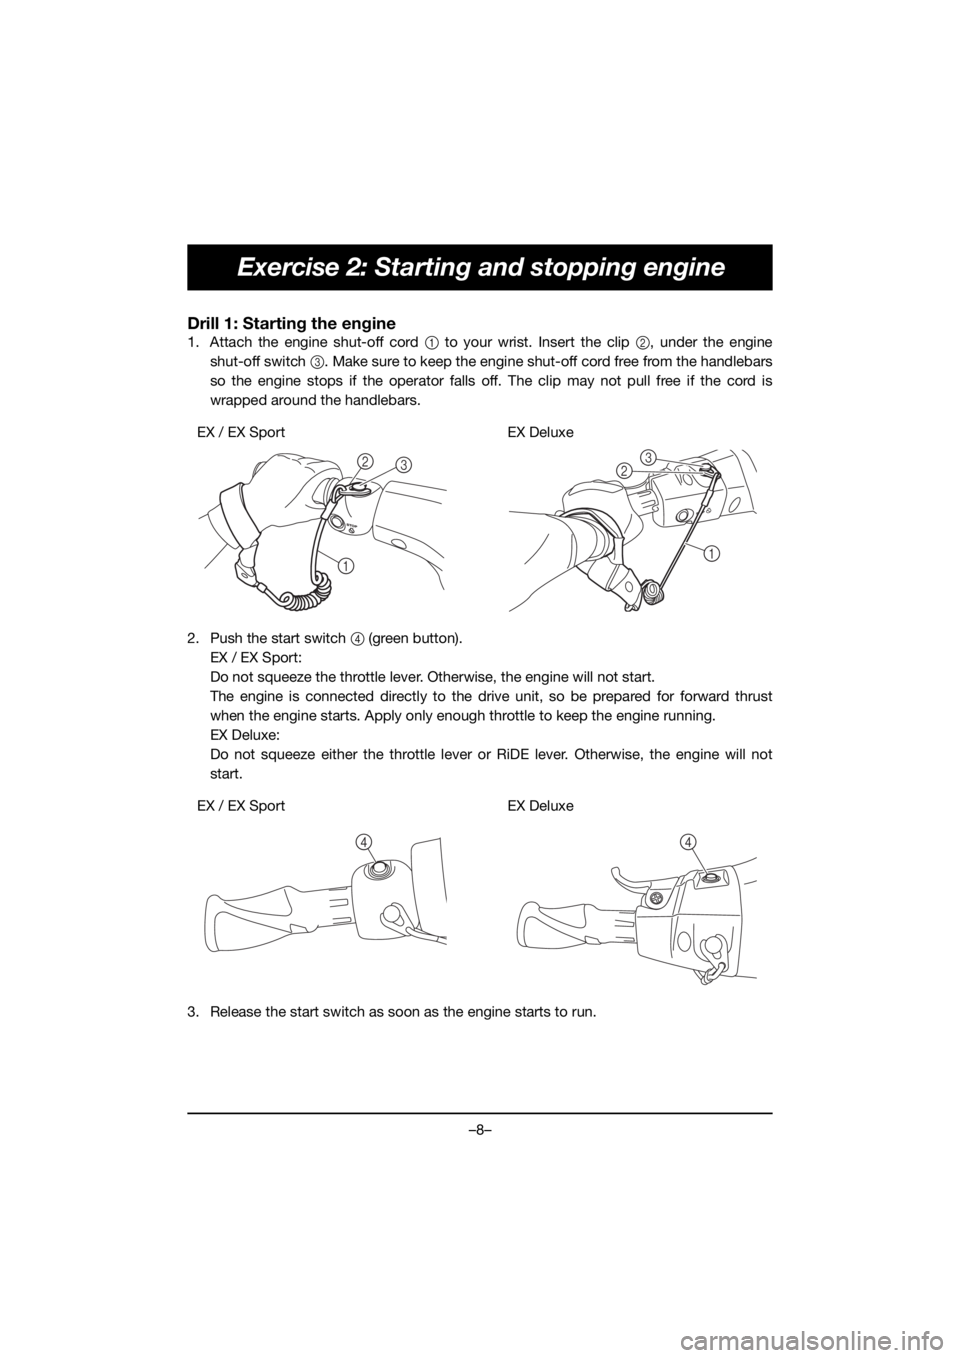 YAMAHA EX SPORT 2019  Bruksanvisningar (in Swedish) –8–
Exercise 2: Starting and stopping engine
Drill 1: Starting the engine
1. Attach the engine shut-off cord 1 to your wrist. Insert the clip 2, under the engine
shut-off switch 3. Make sure to ke